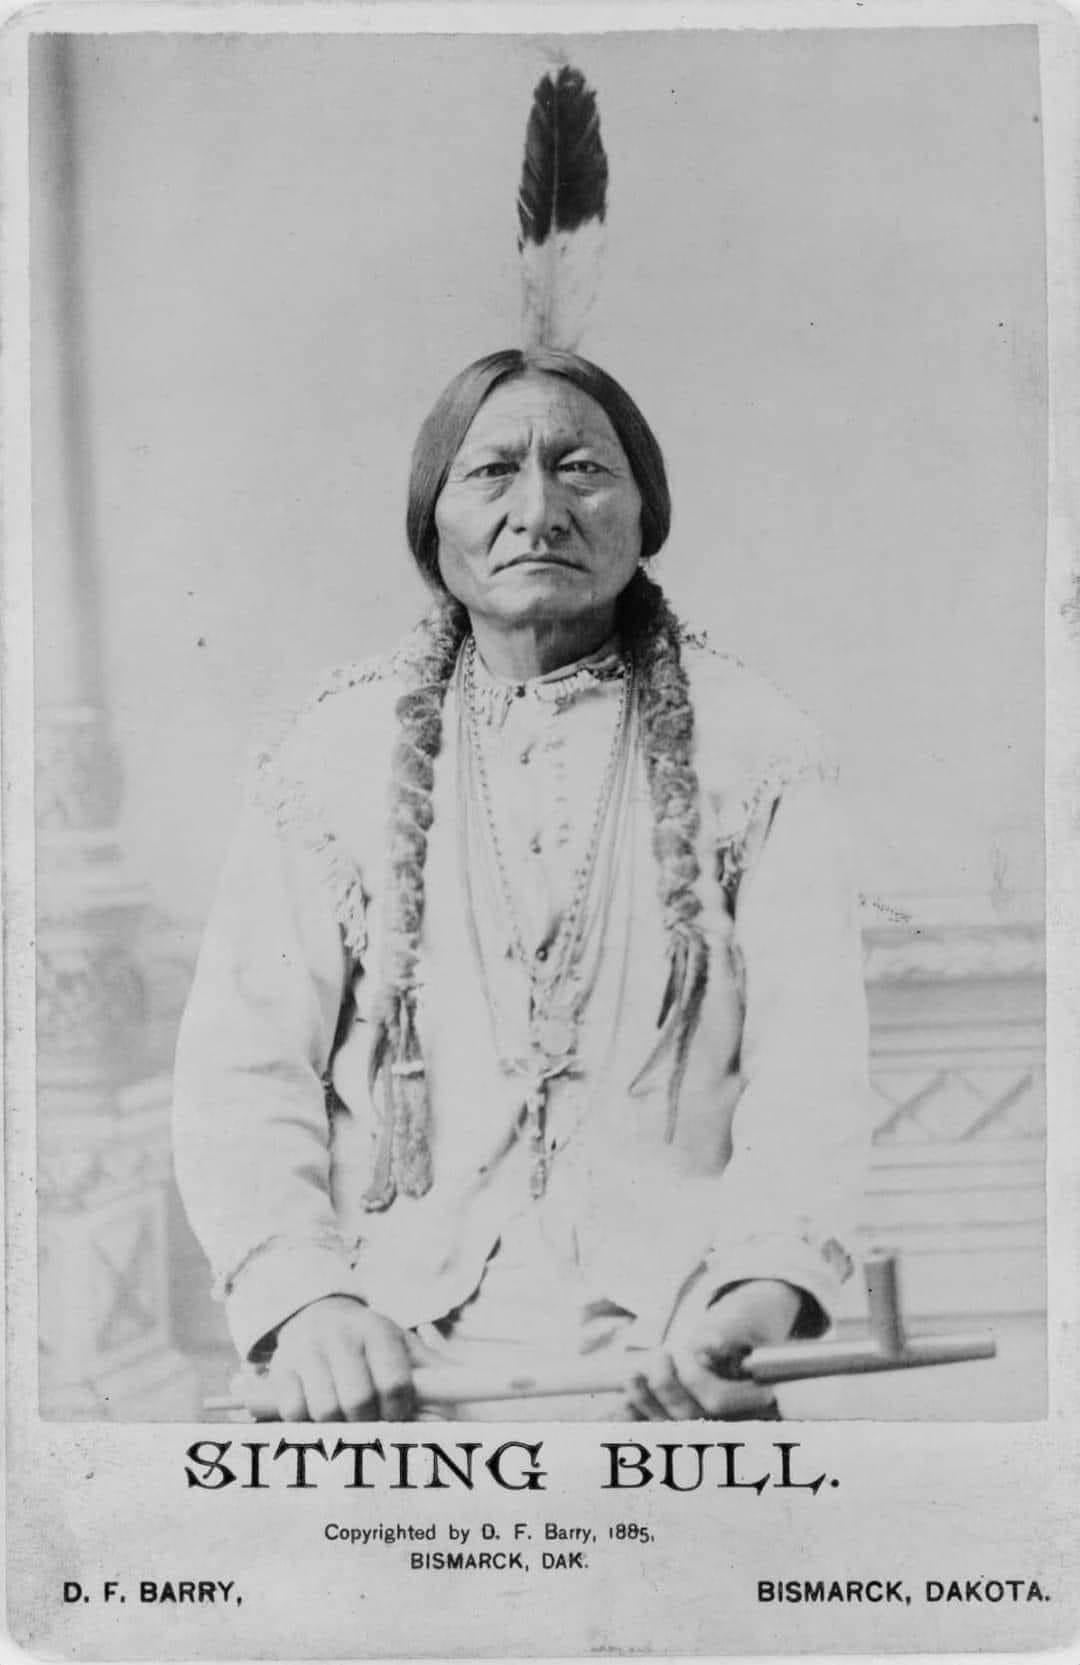 Daily Encouragement & Specials- Sitting Bull wore a crucifix